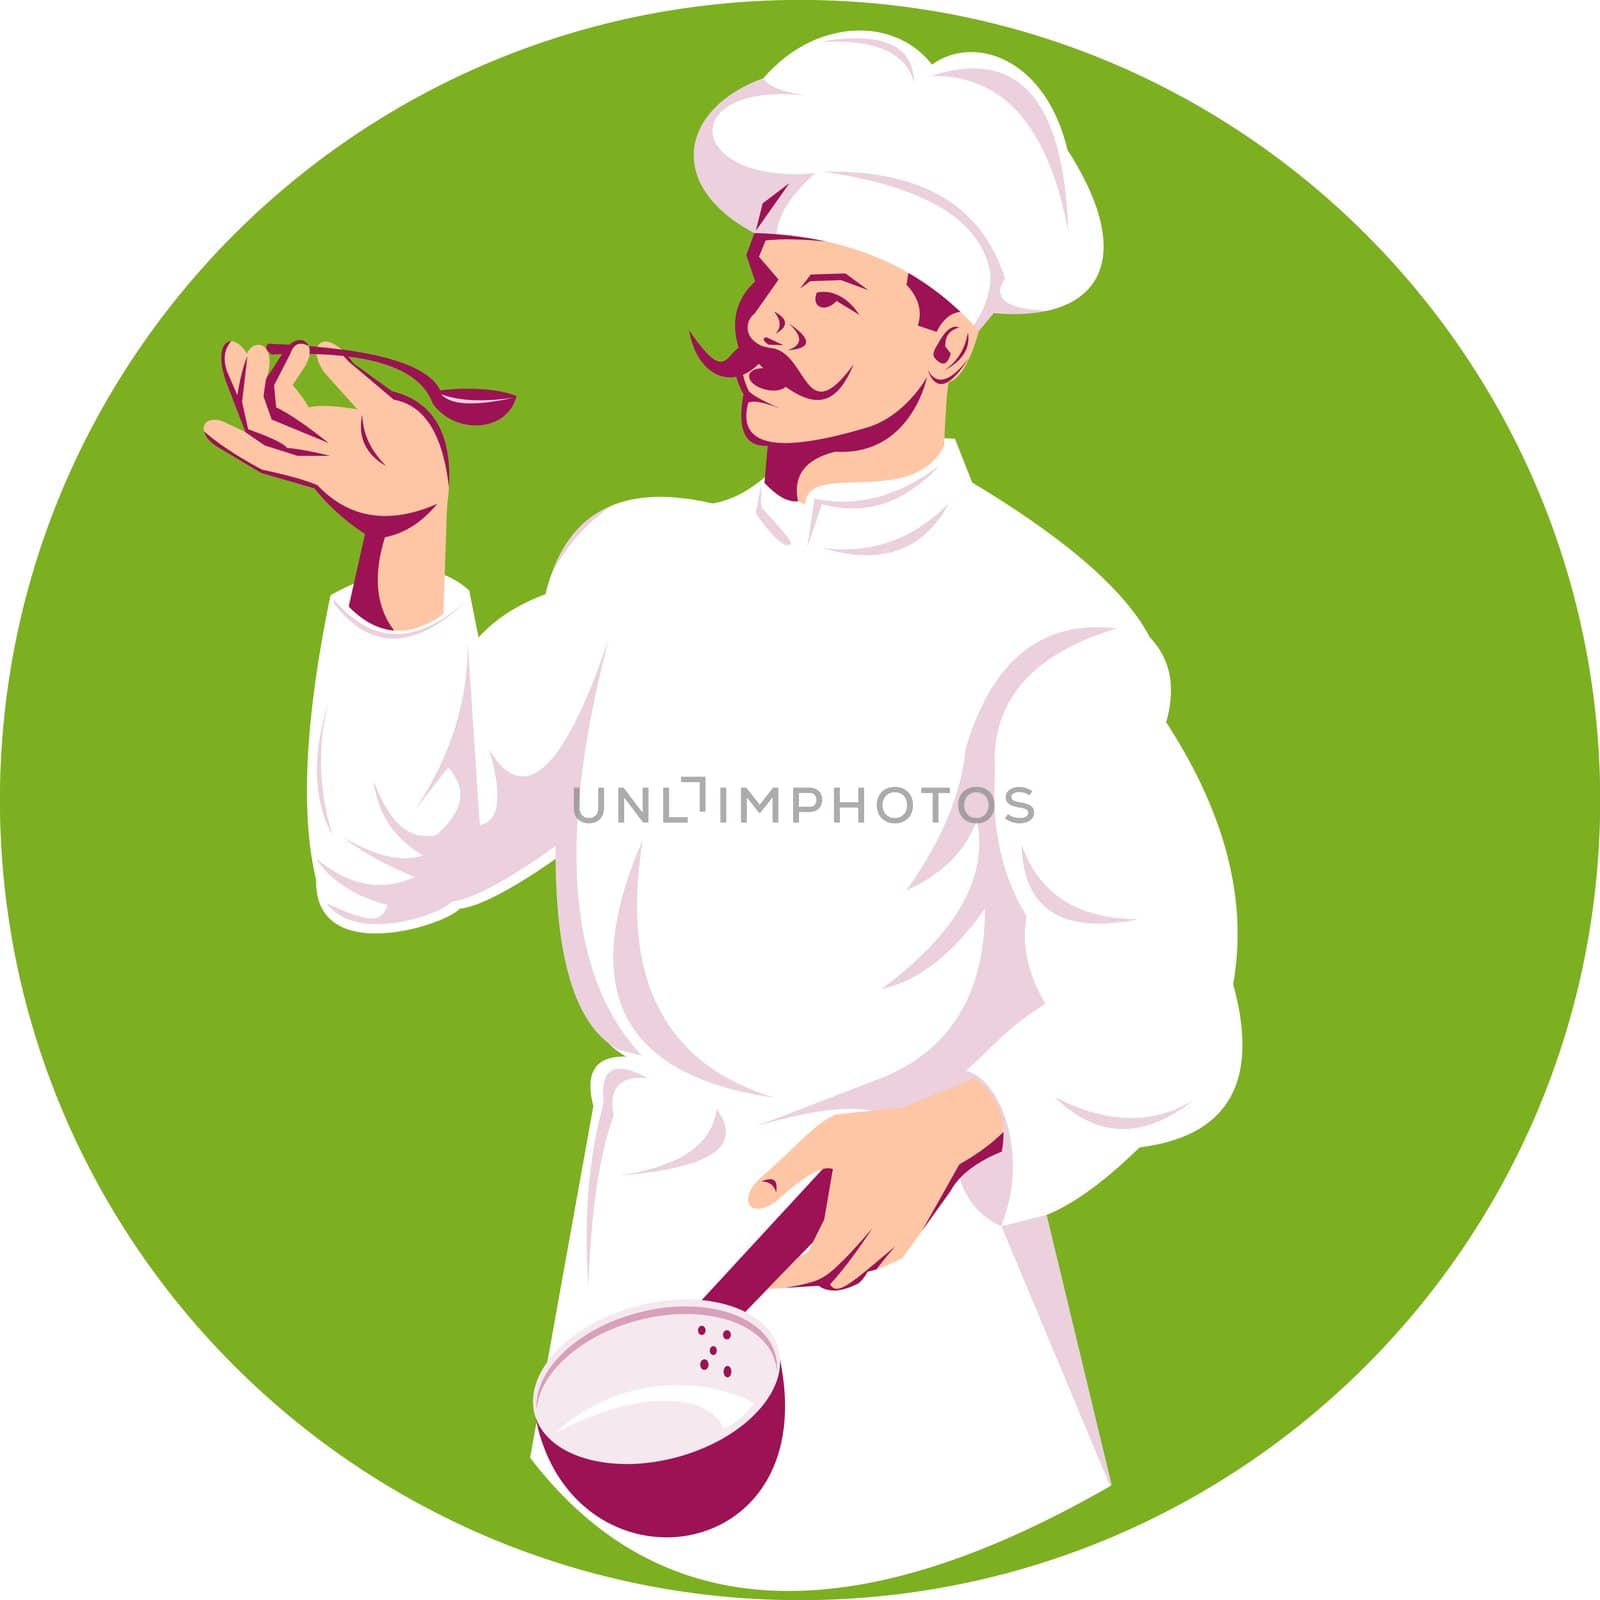 chef cook baker holding sauce pan and spoon by patrimonio